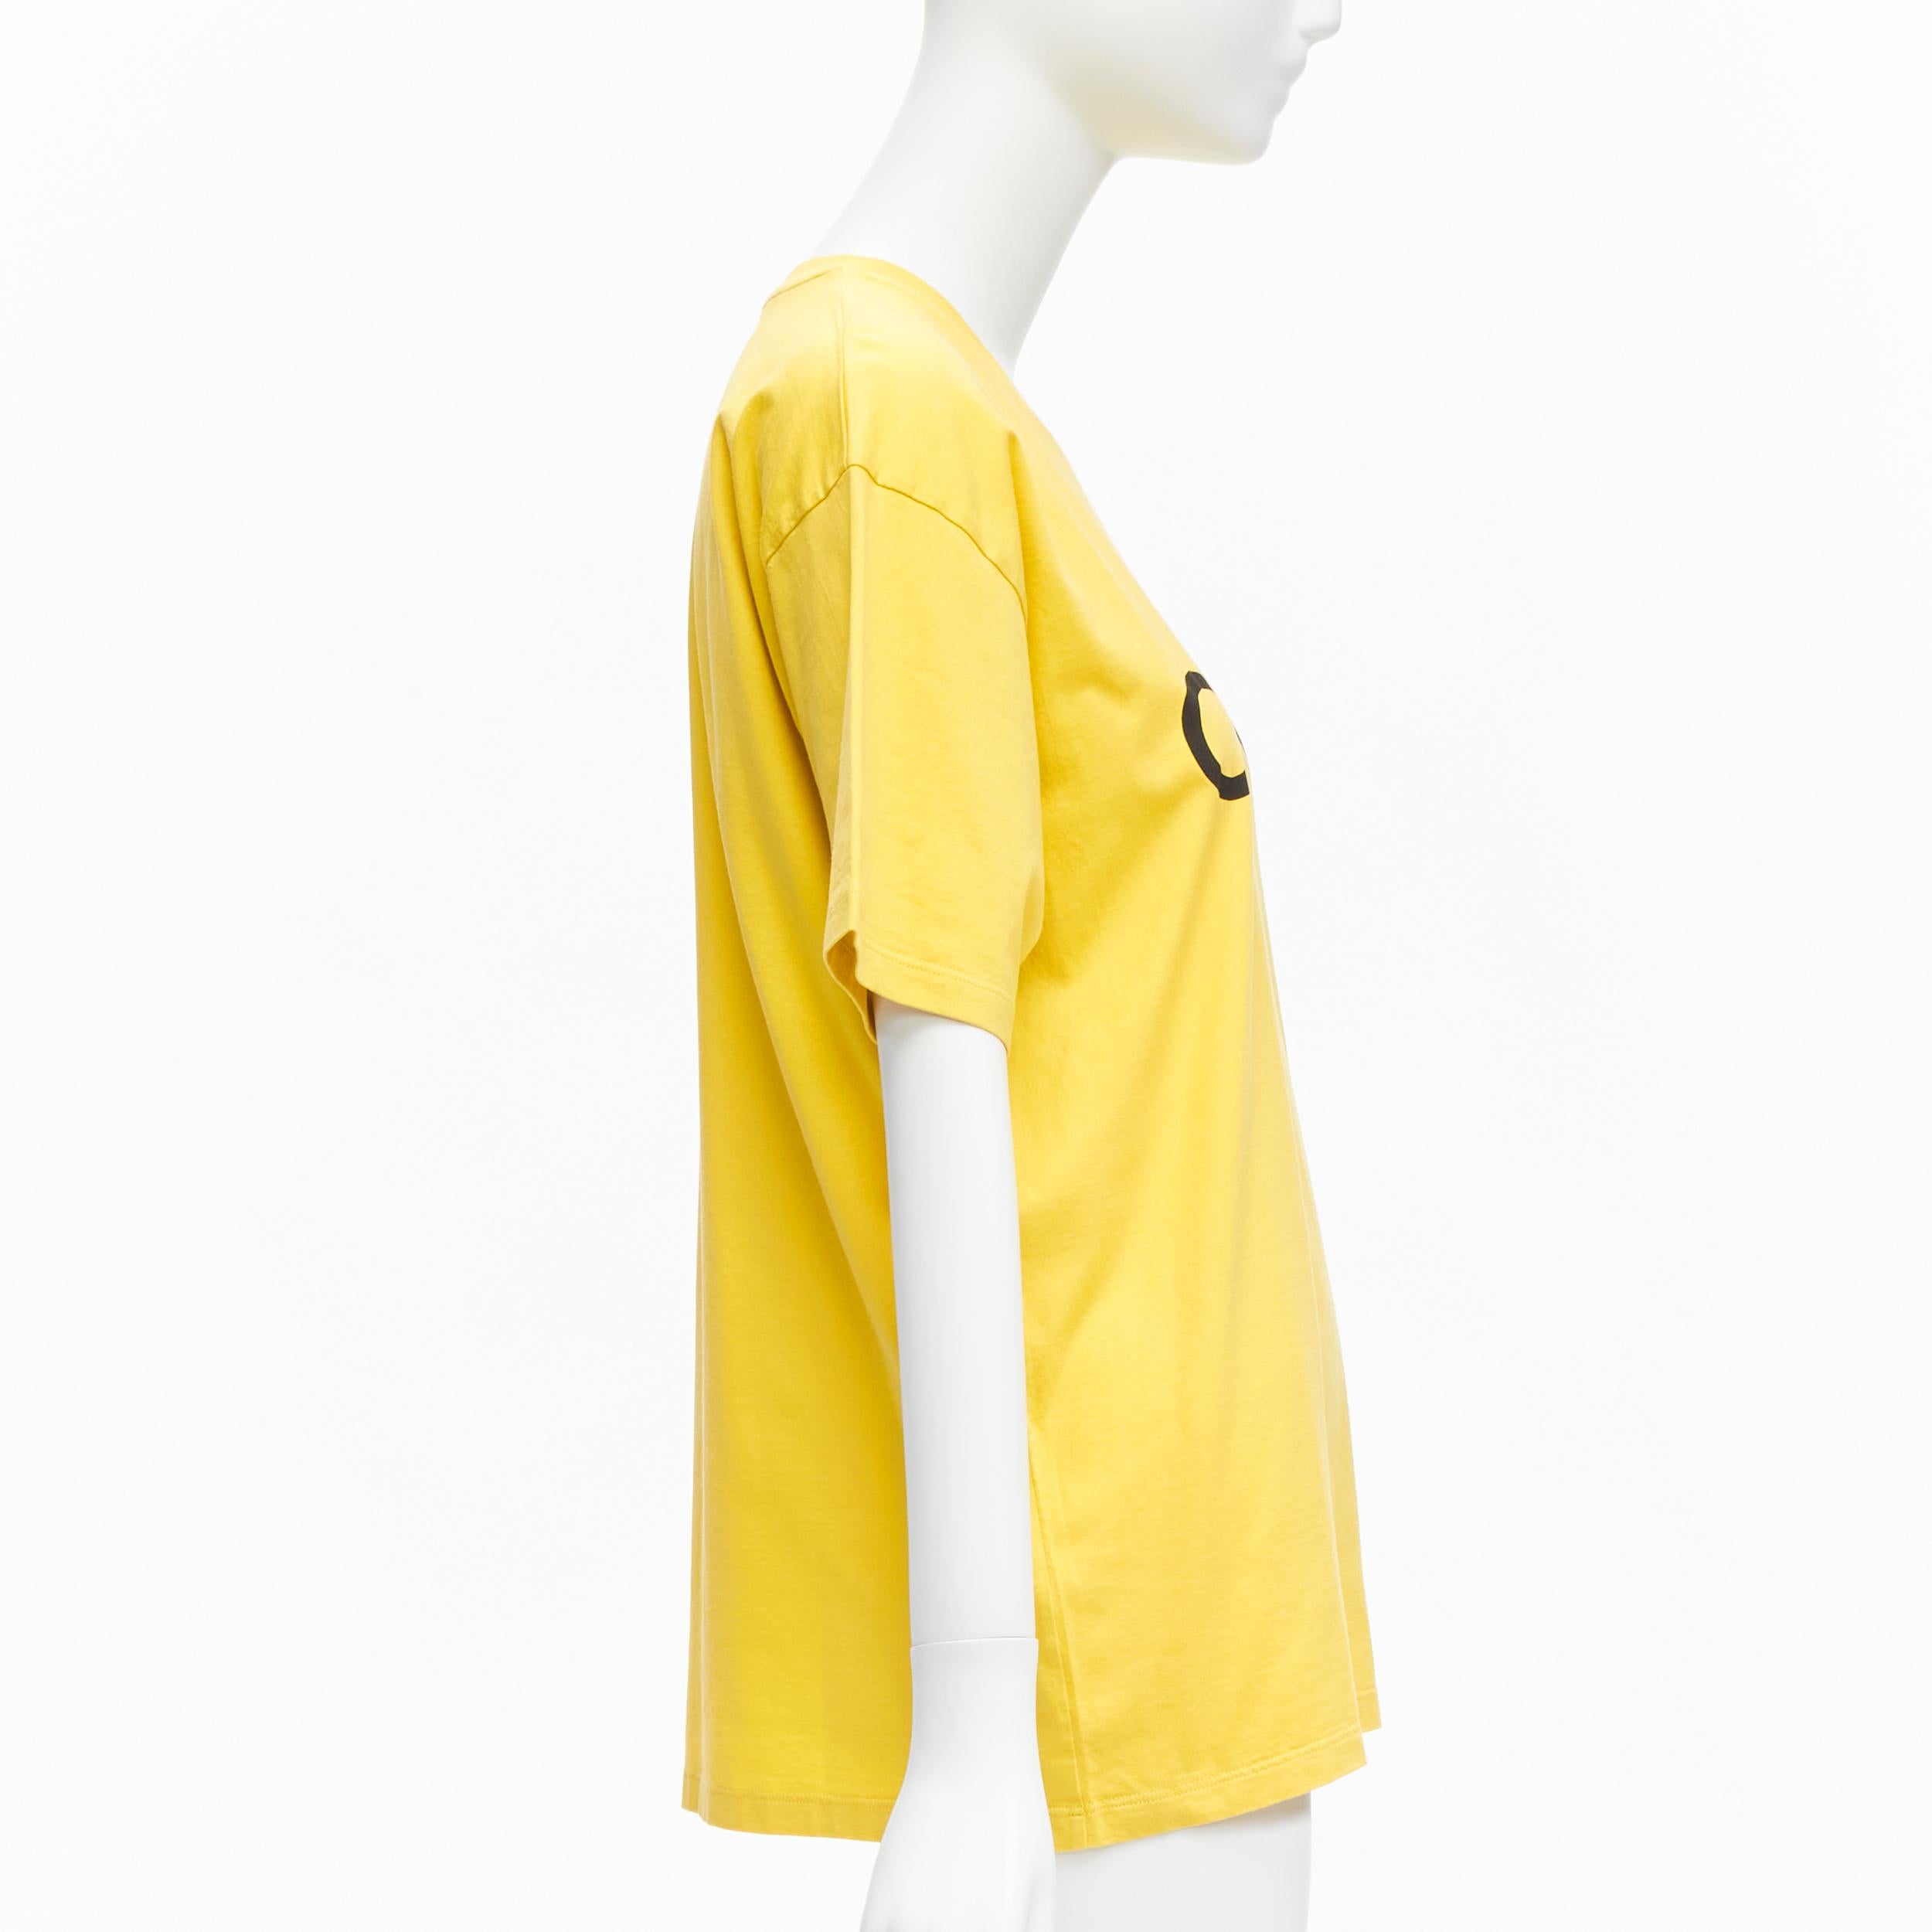 CELINE Hedi Slimane yellow black logo cotton short sleeves round neck tshirt XS In Excellent Condition For Sale In Hong Kong, NT